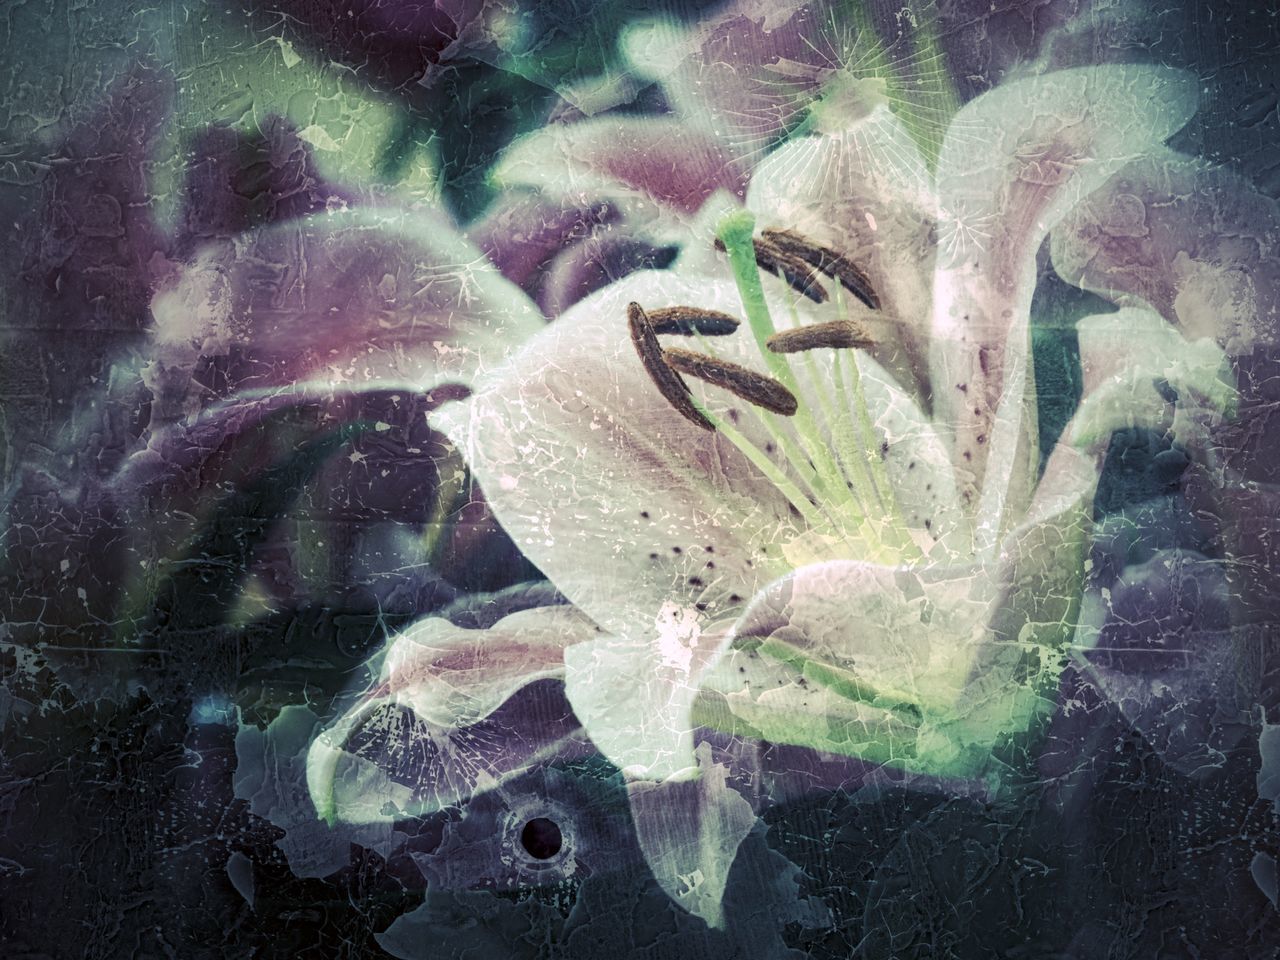 DIGITAL COMPOSITE IMAGE OF FLOWER AND GLASS